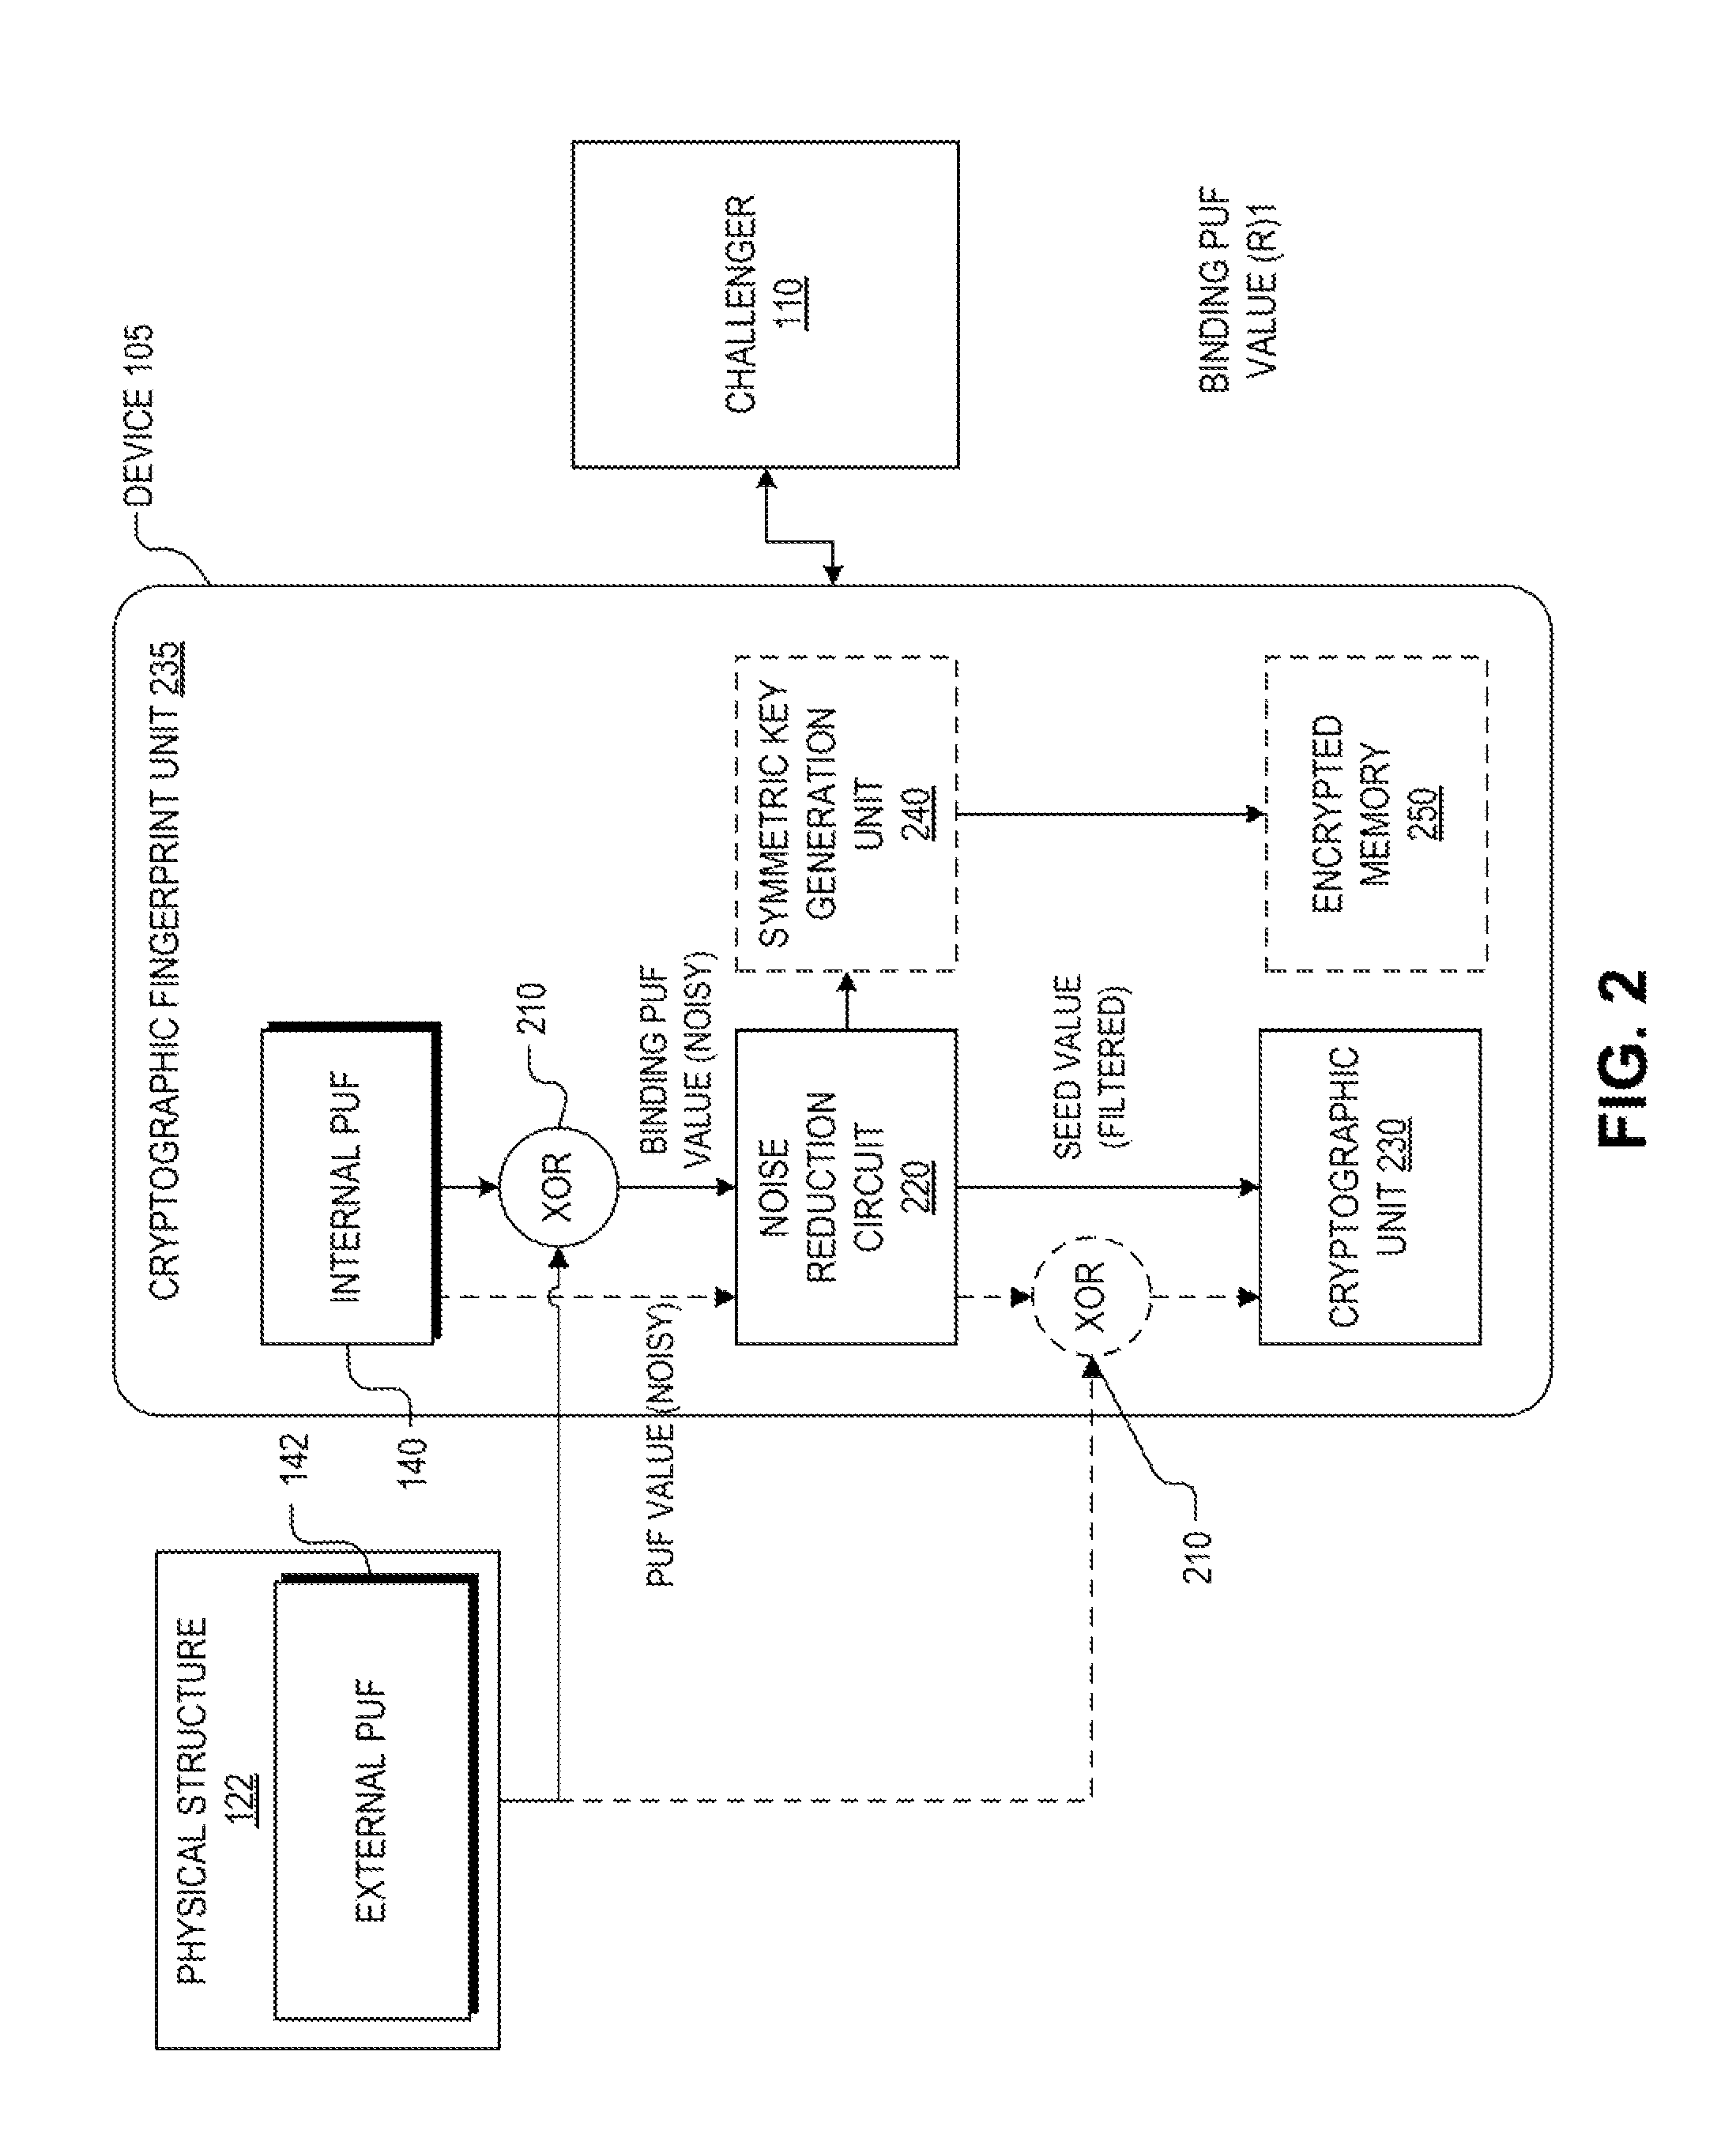 Hardware device to physical structure binding and authentication